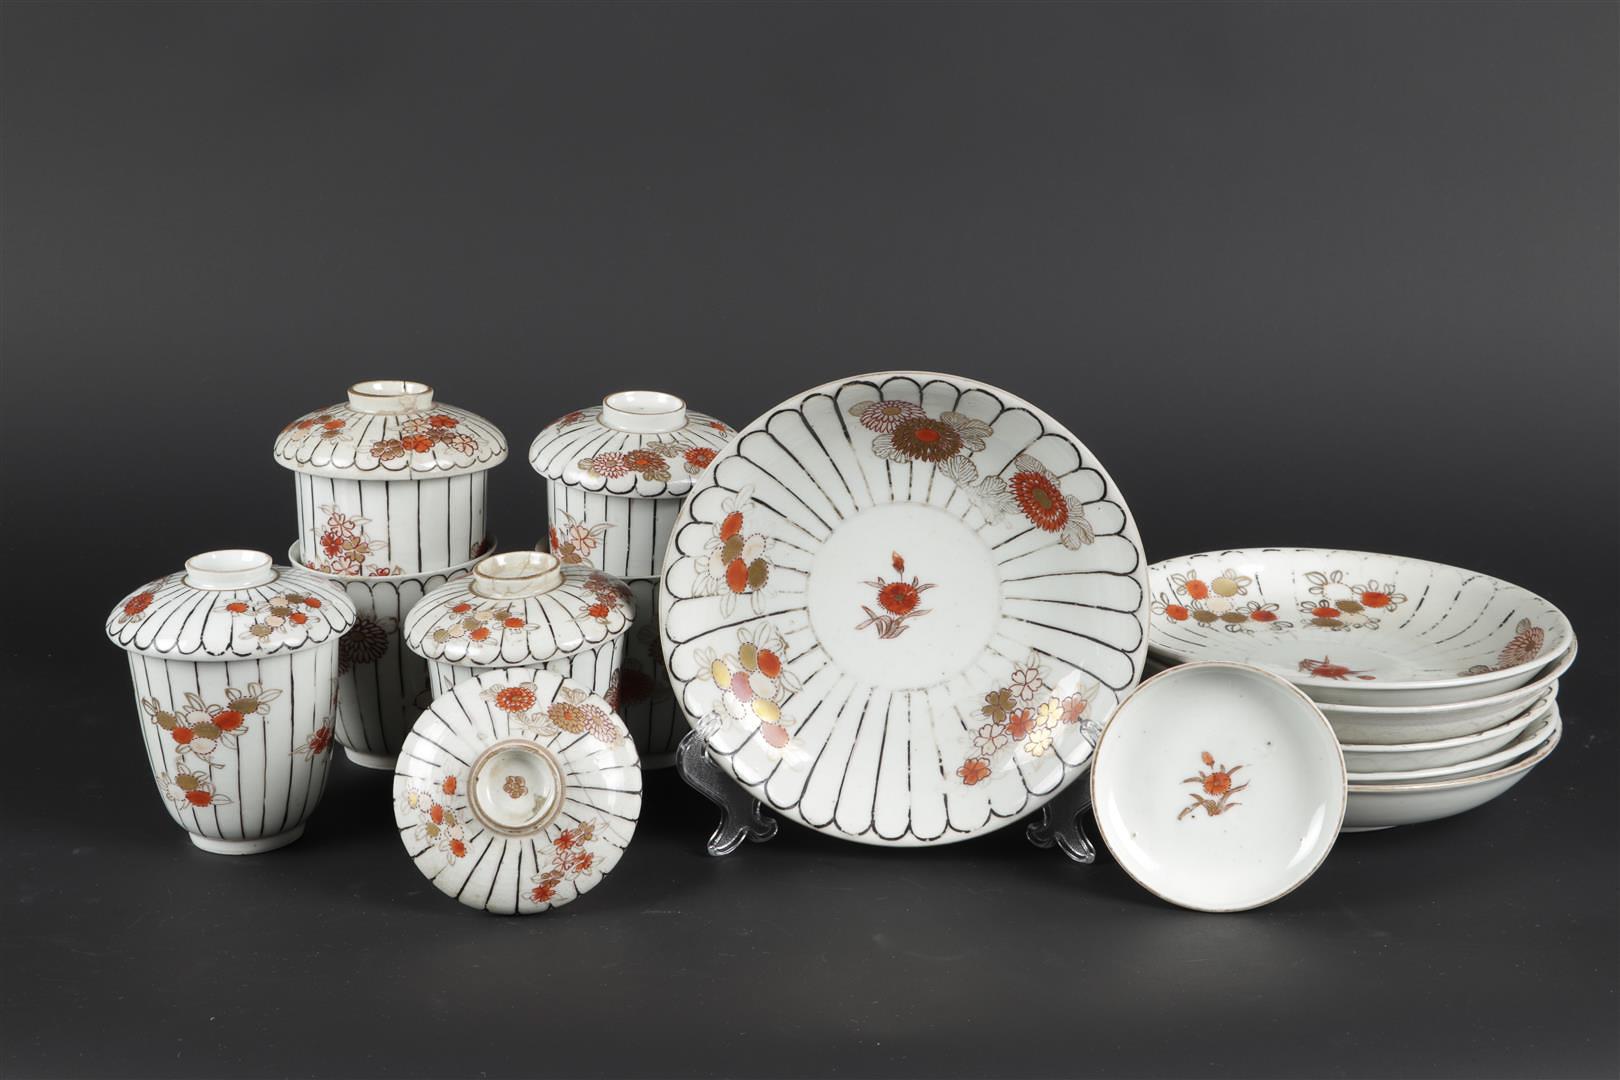 Six porcelain, high model Imari cups and saucers with lids (chocolate cups). Japan, 18th century.